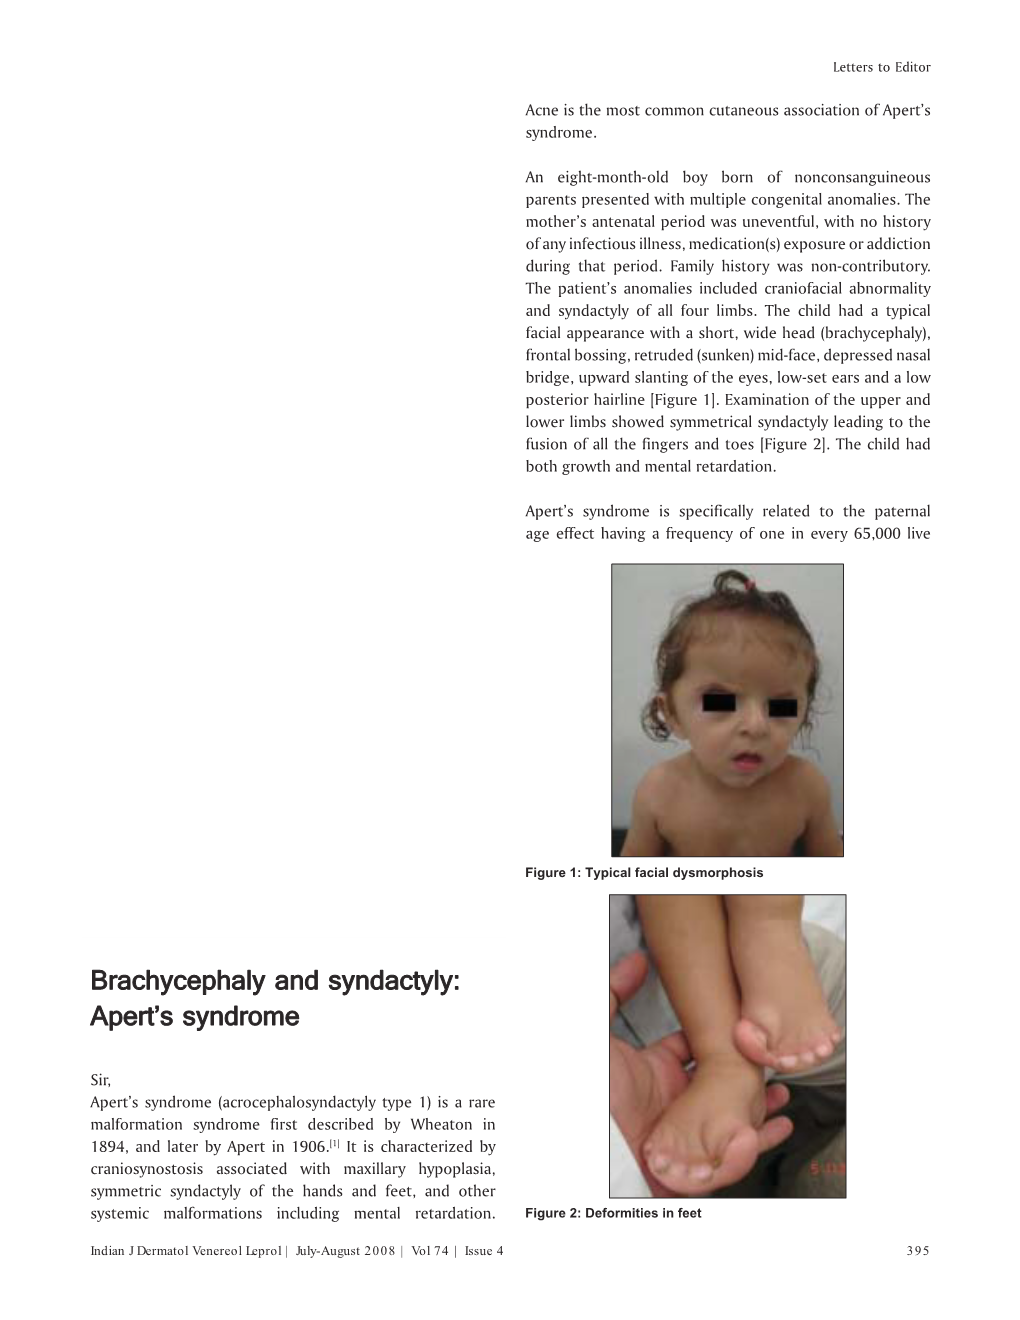 Brachycephaly and Syndactyly: Apert's Syndrome